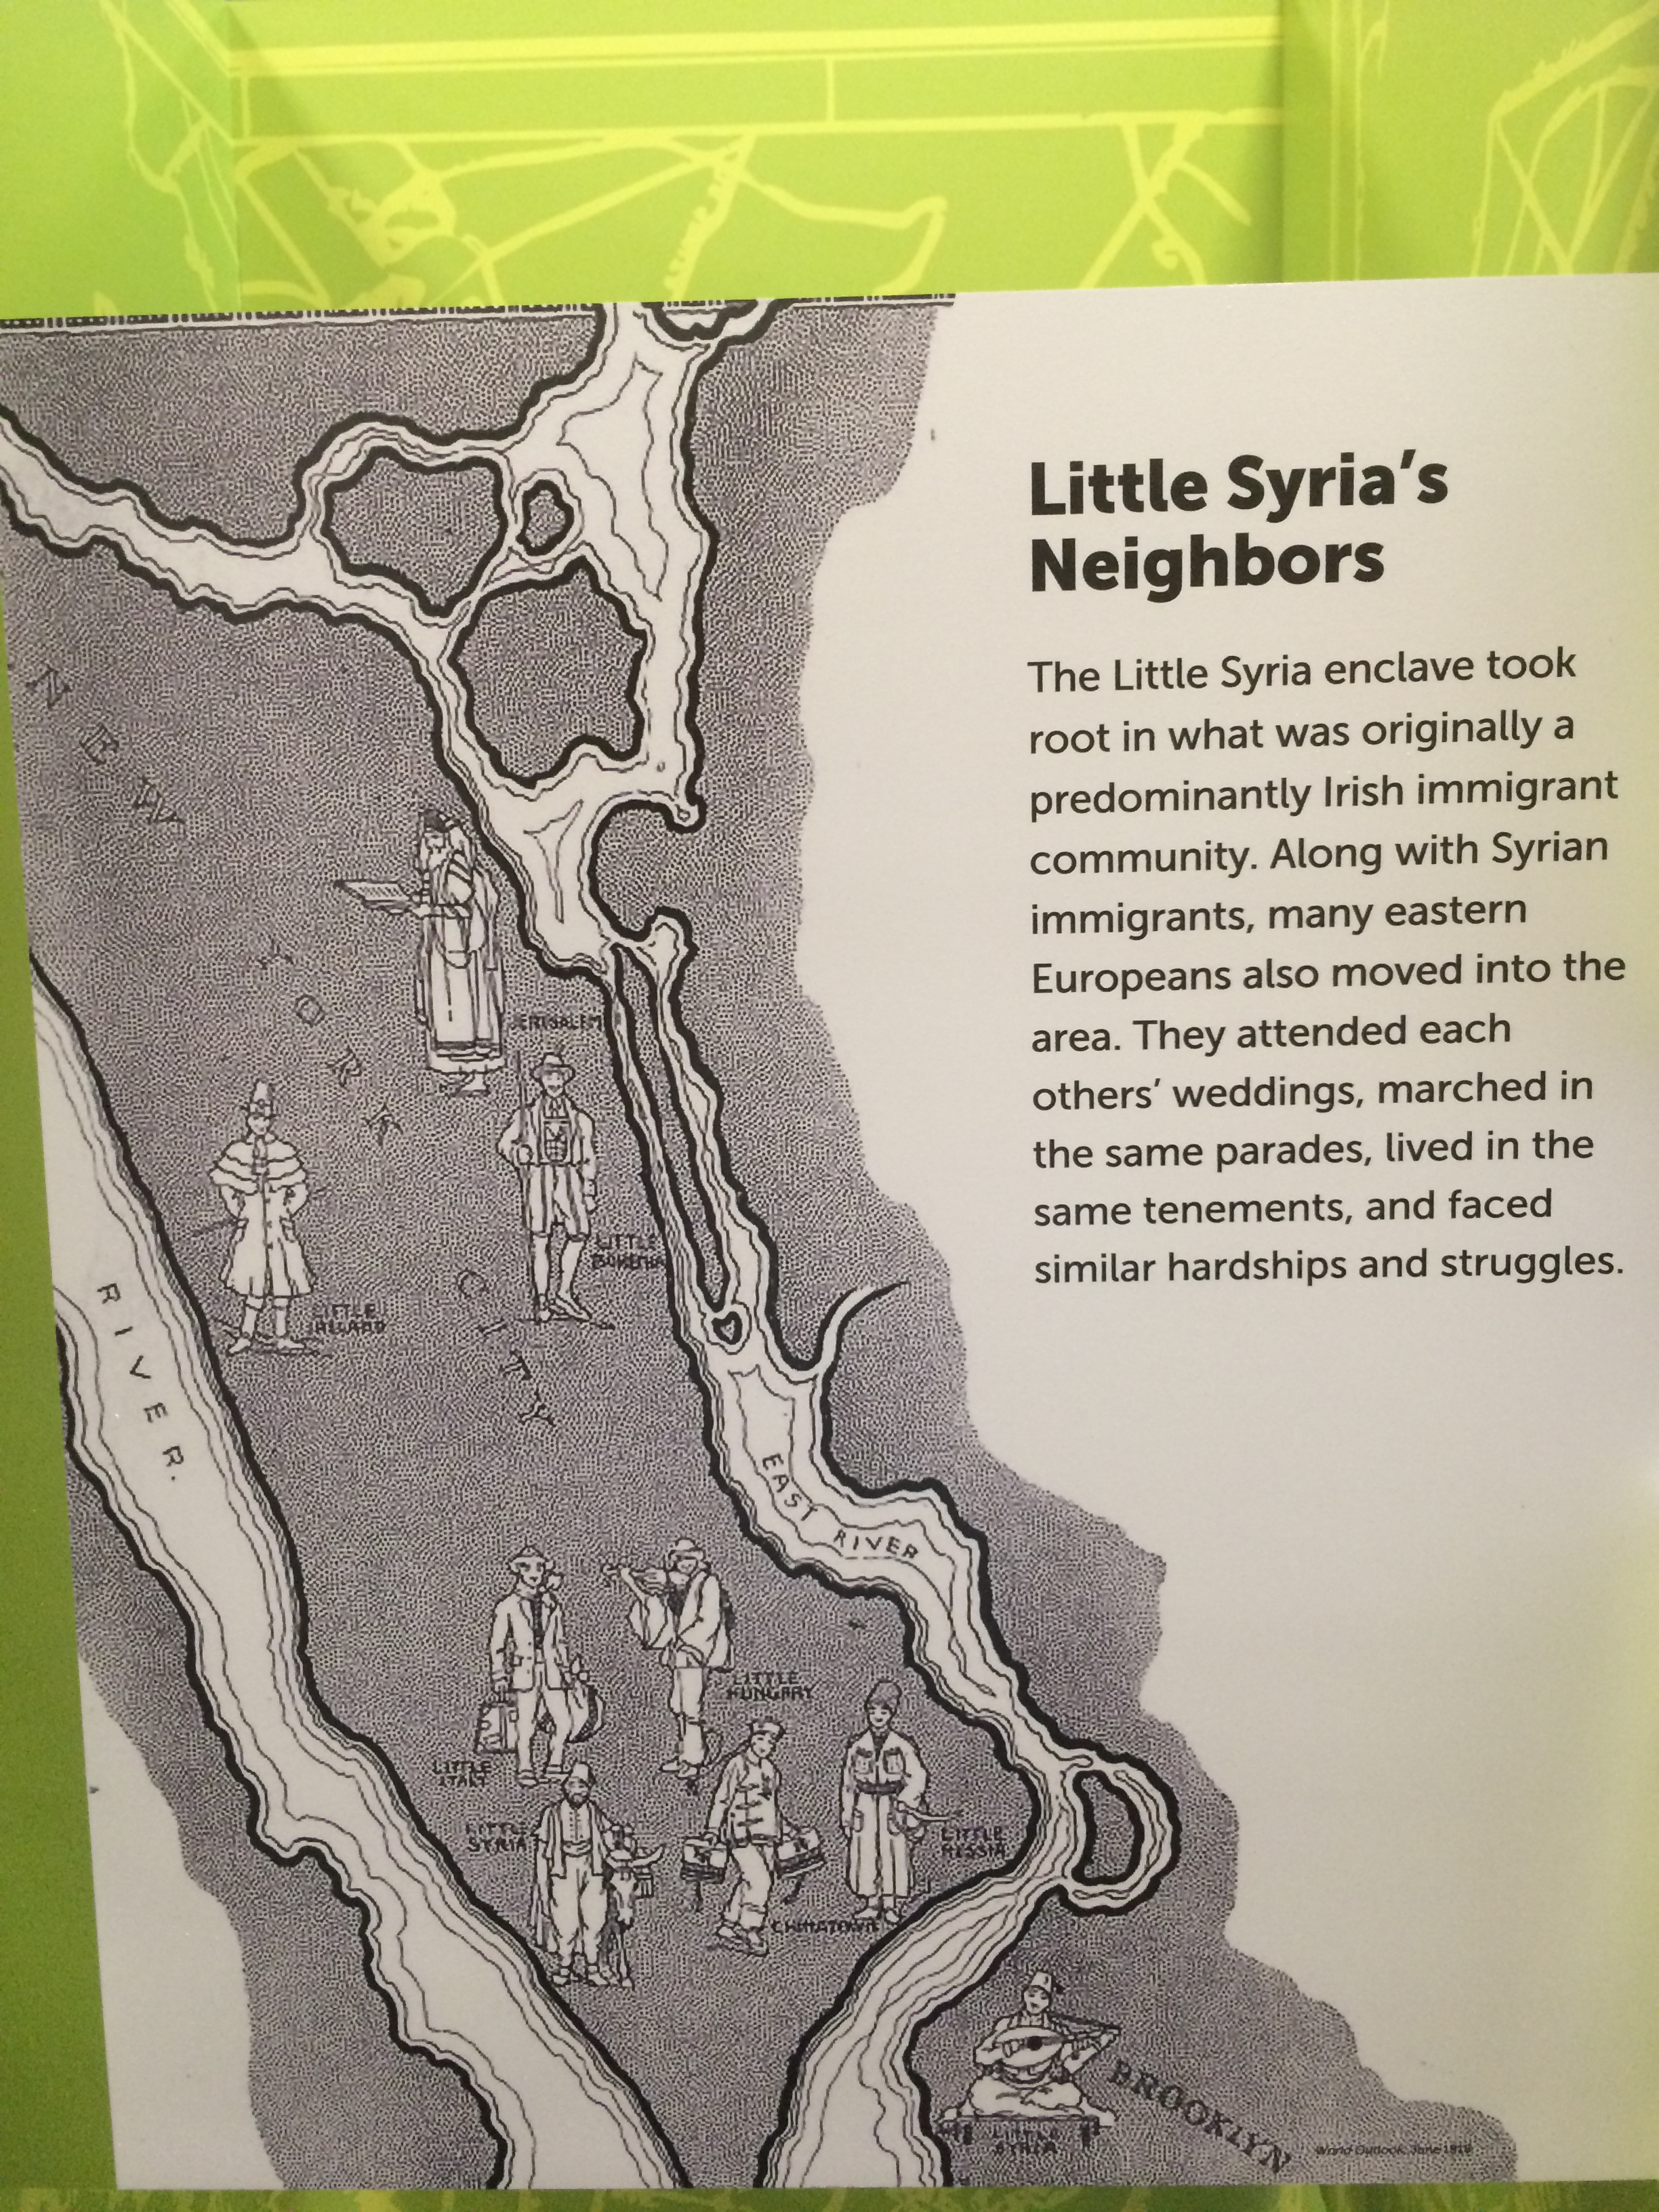 Rediscovering the Forgotten History of Little Syria, NYC_exhibit 2_NYC_Untapped Cities